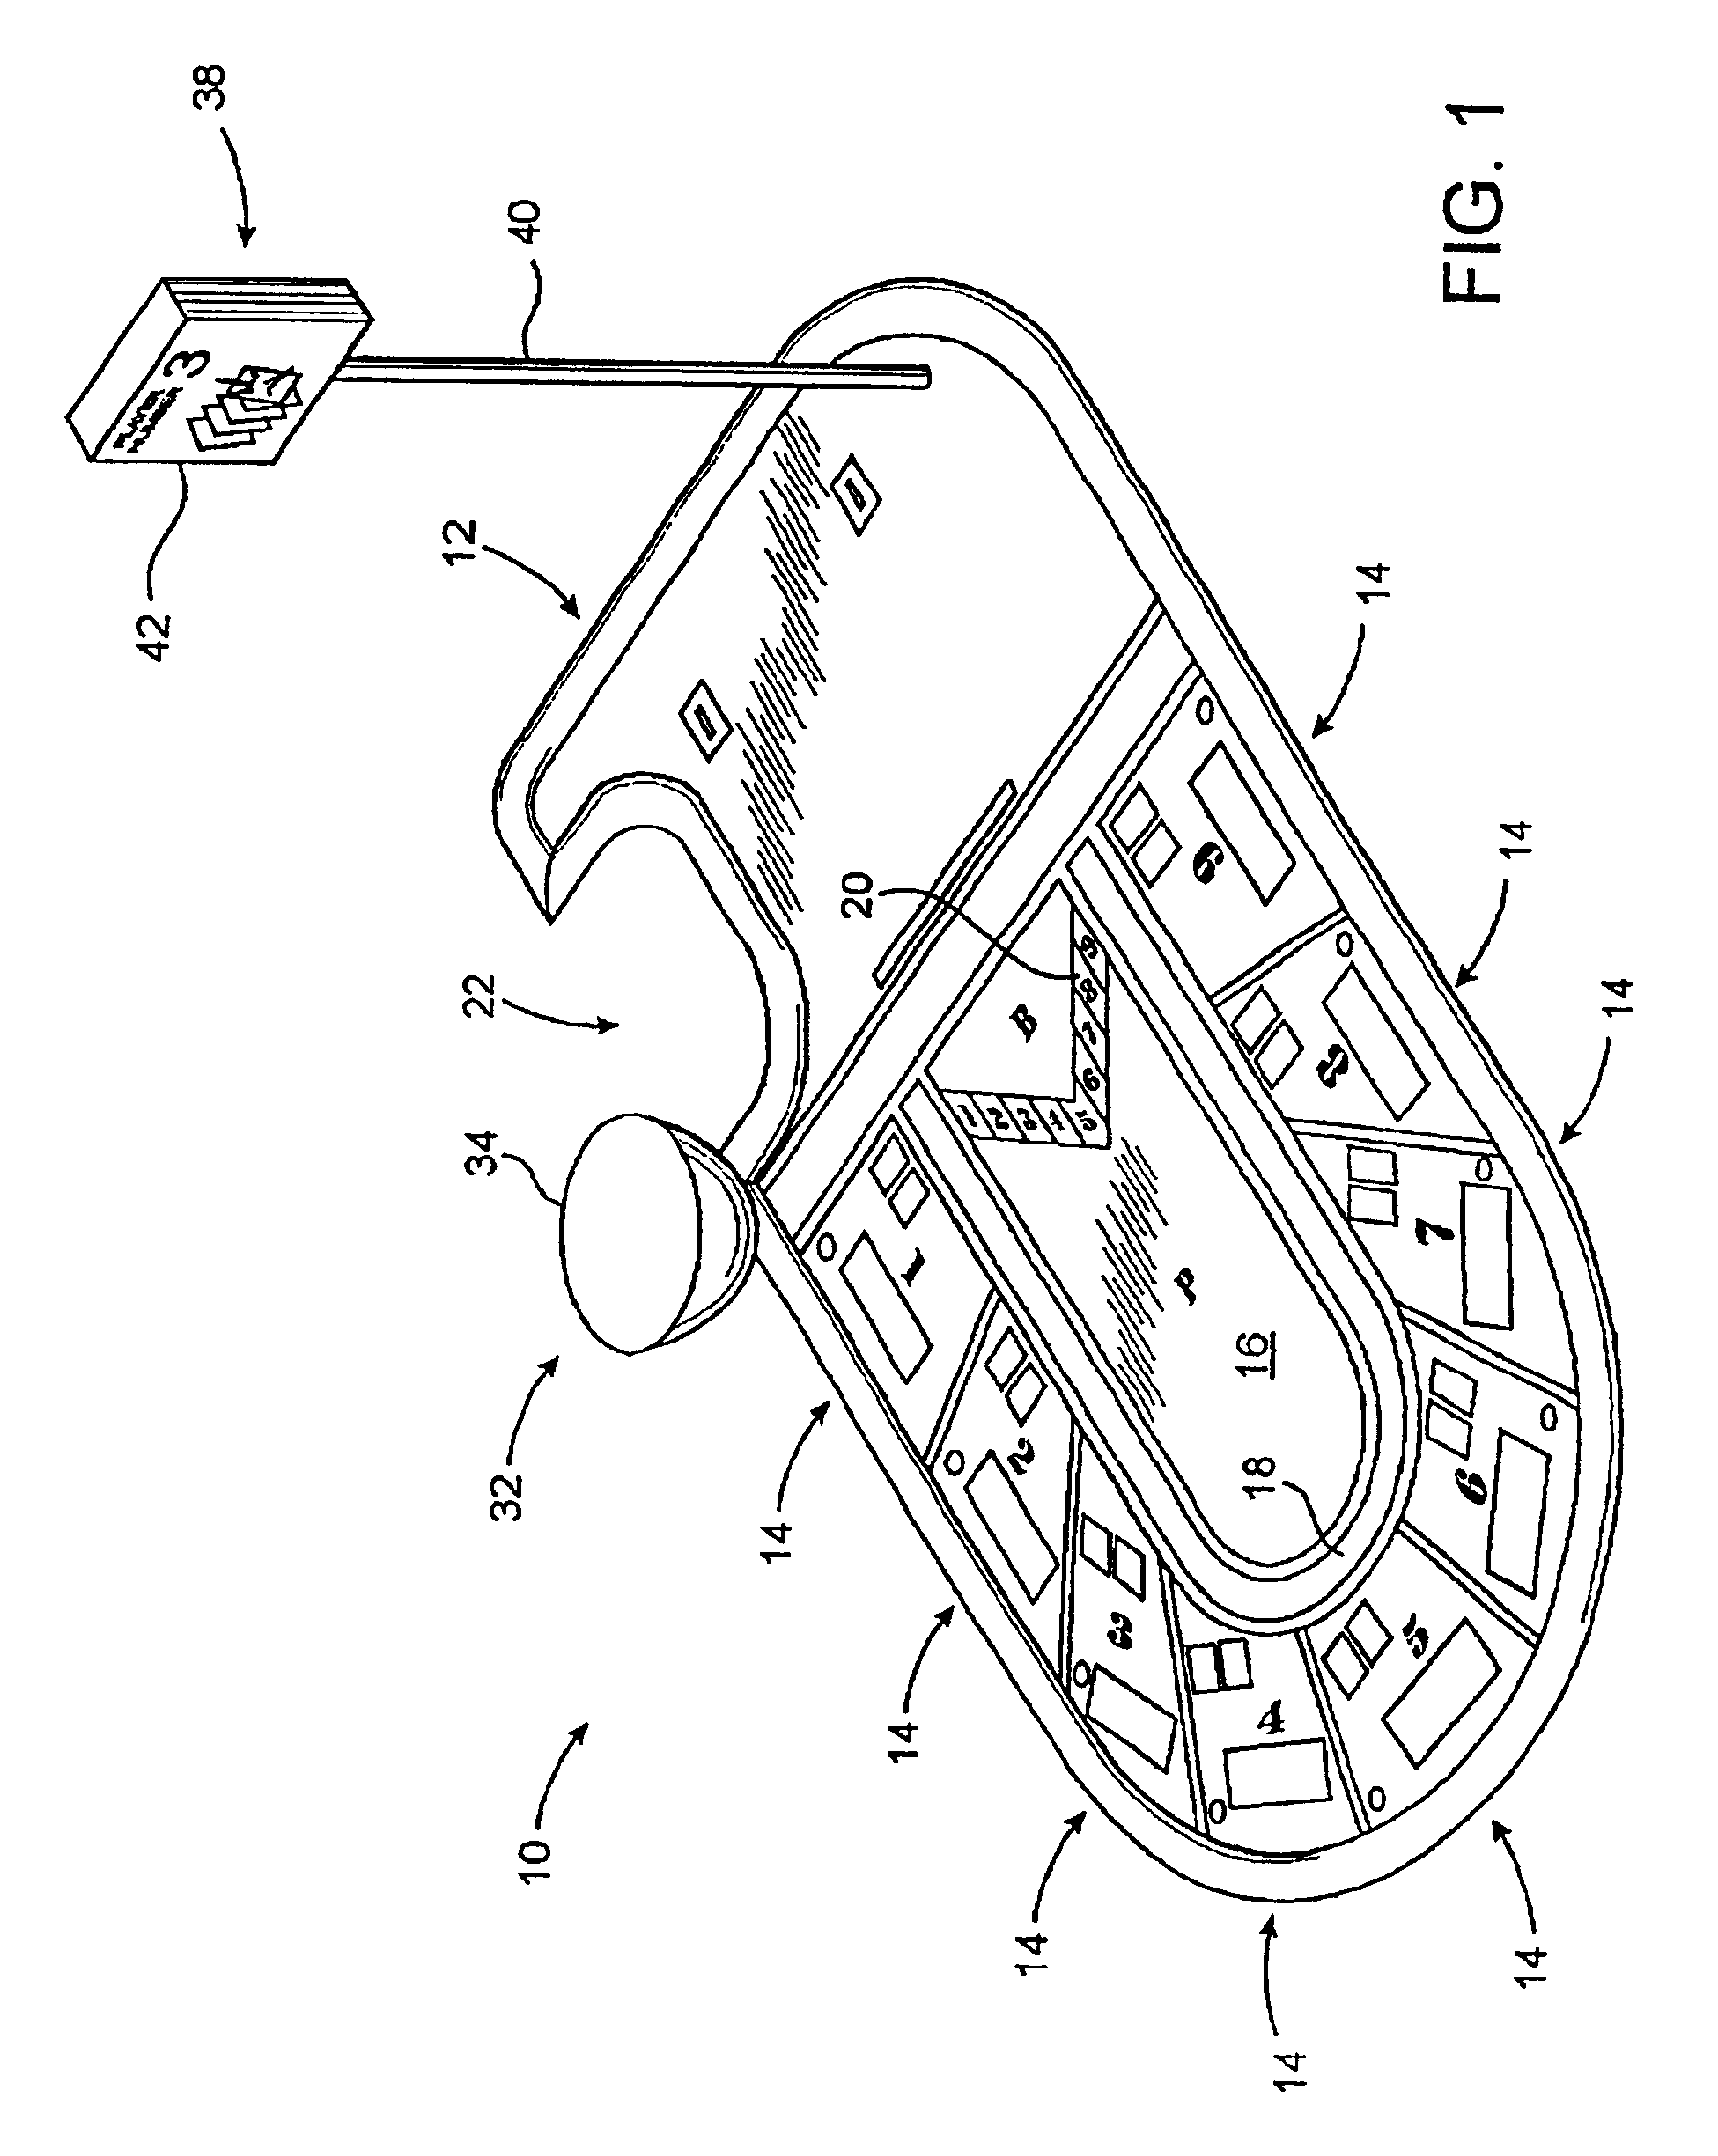 Baccarat gaming assembly and method of playing baccarat